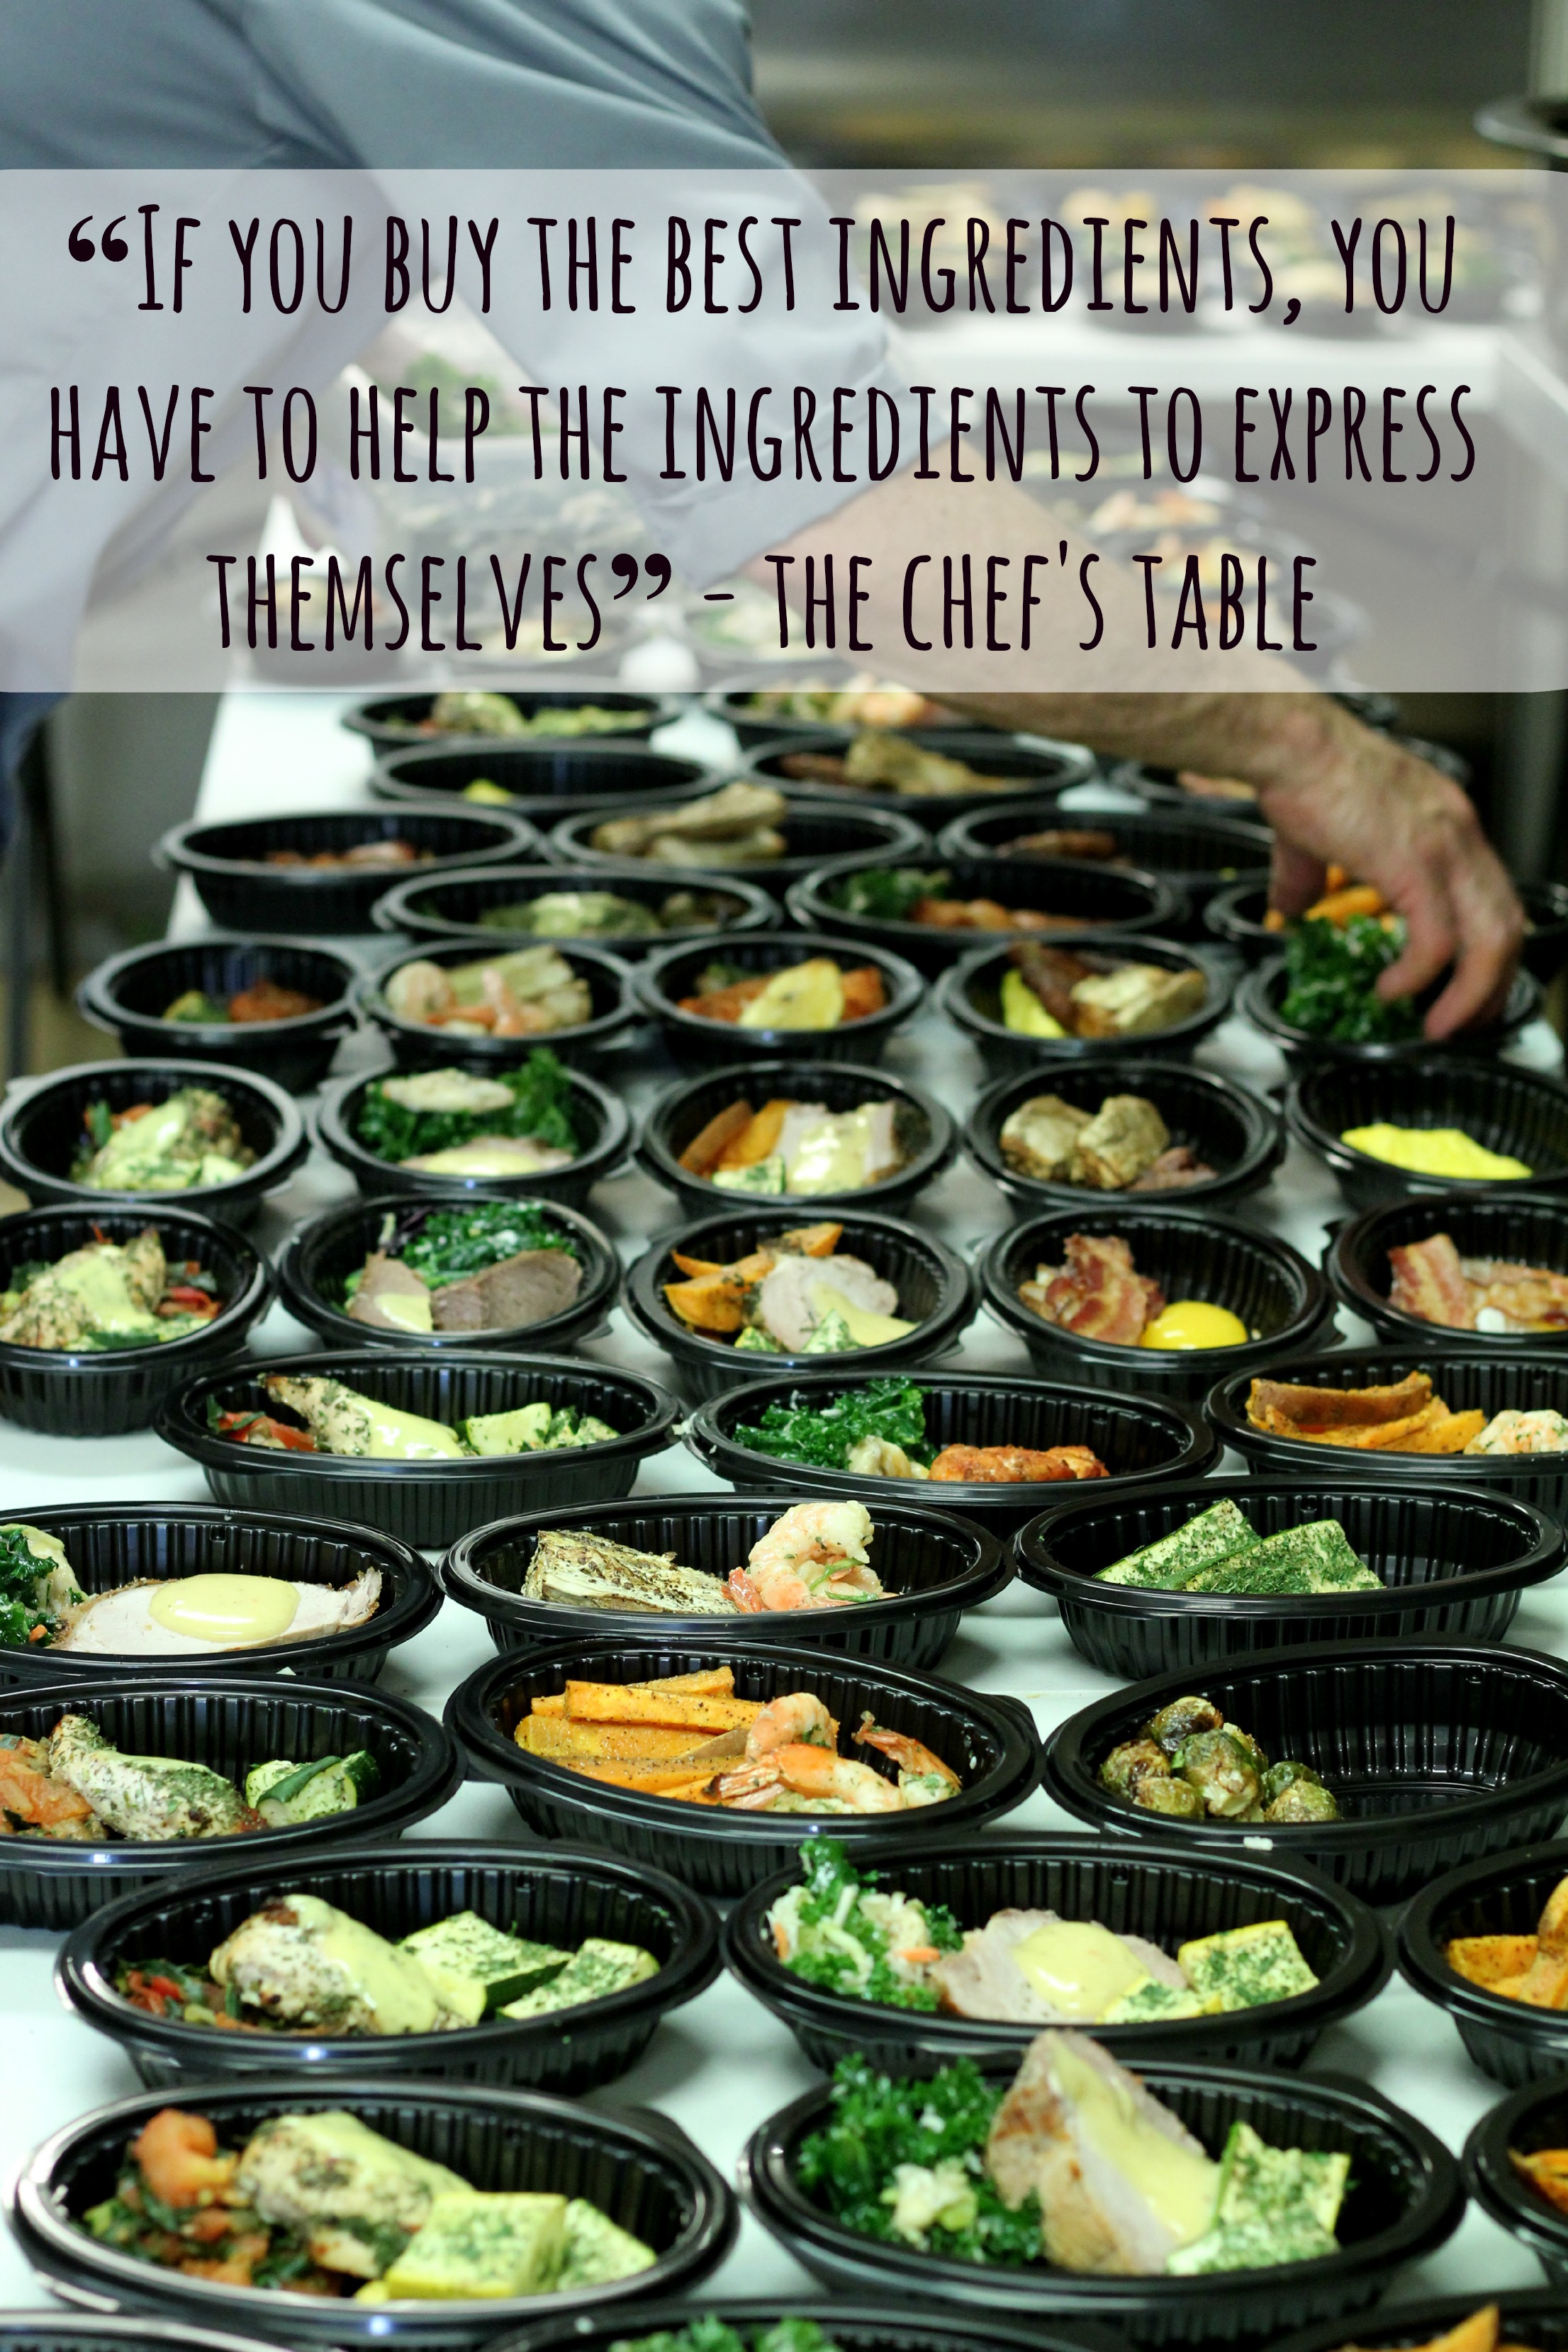 Chef's Table quote